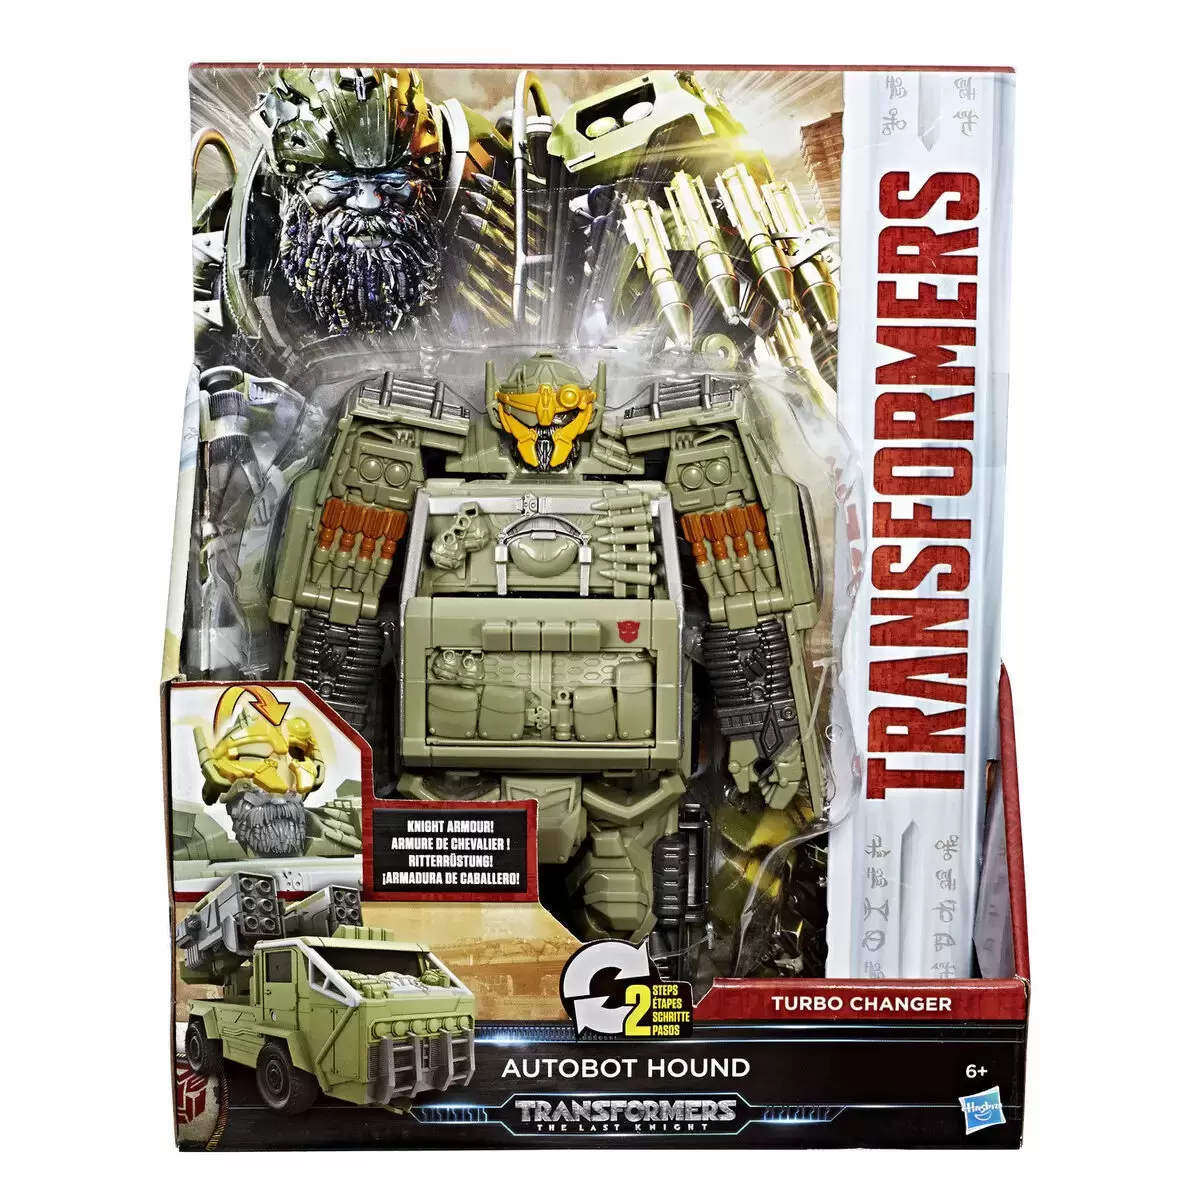 Transformers The Last Knight - Autobot Hound Turbo Changer